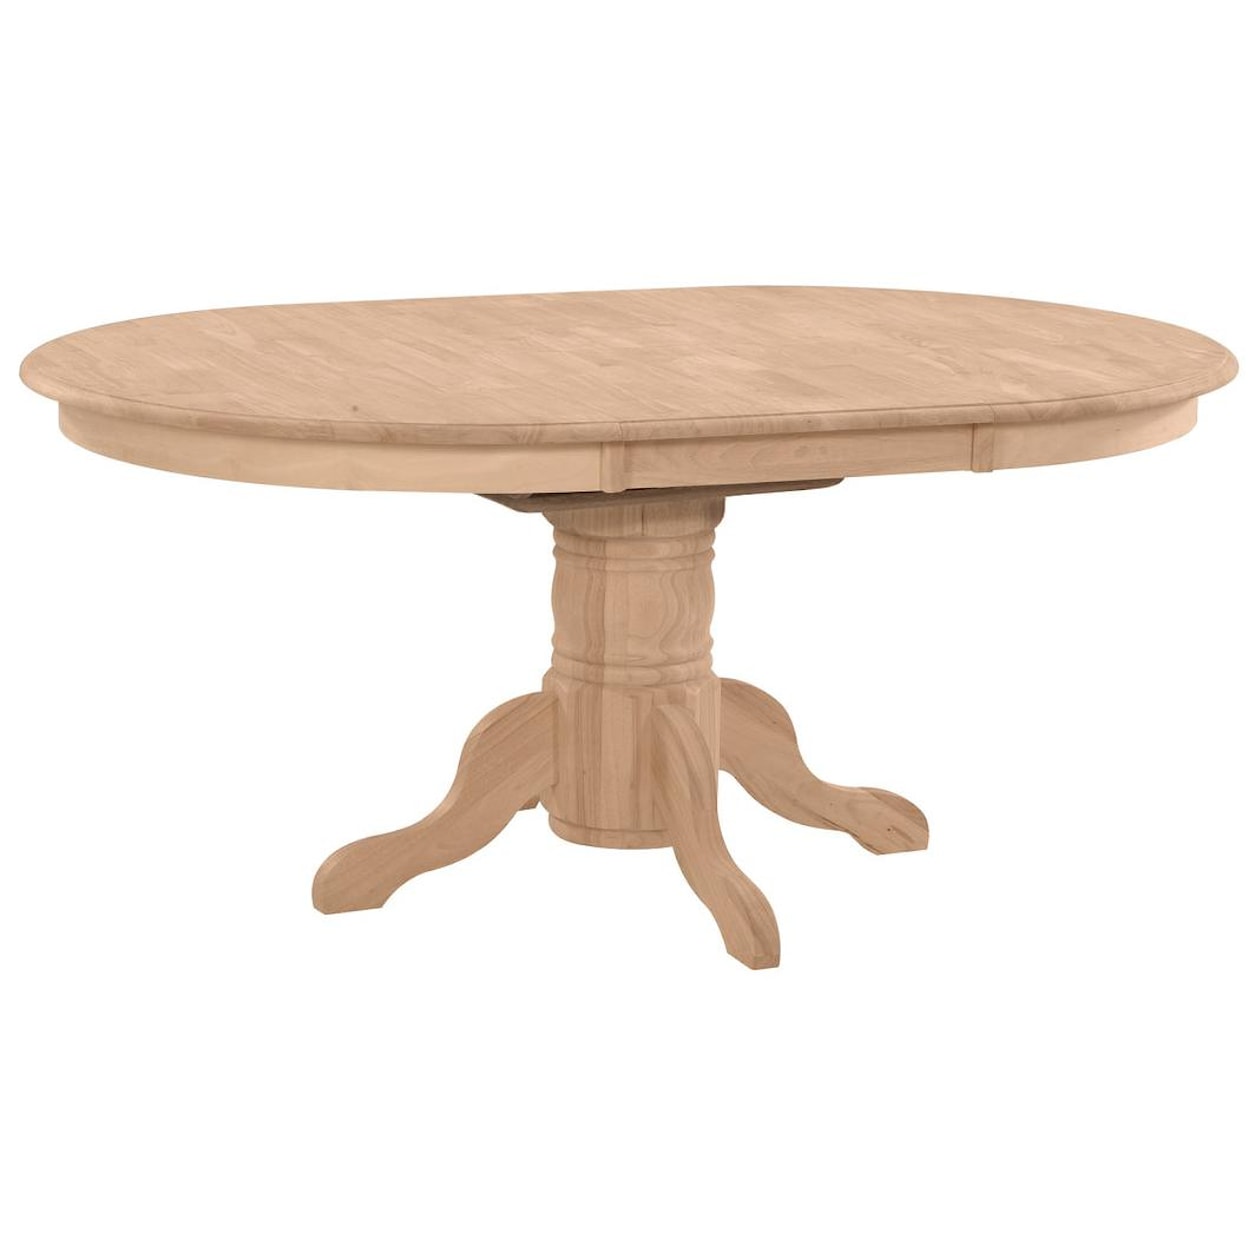 John Thomas SELECT Dining Room Butterfly Leaf Oval Pedestal Dining Table